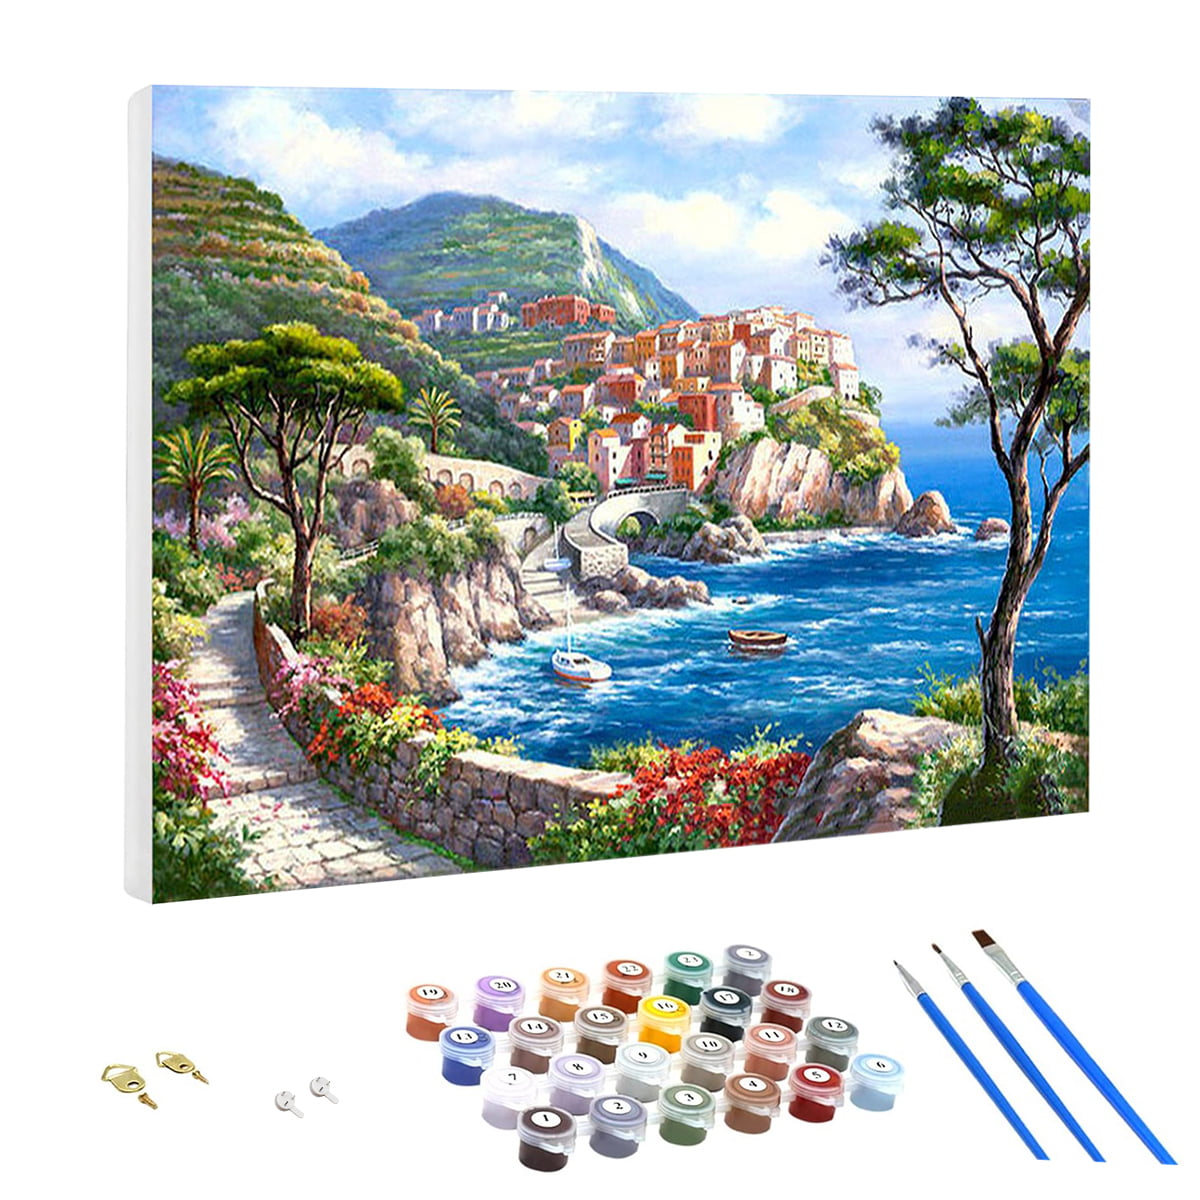 Peaceful Vacation Paint By Number Kit For Adult DIY Painting 40x50CM Canvas 